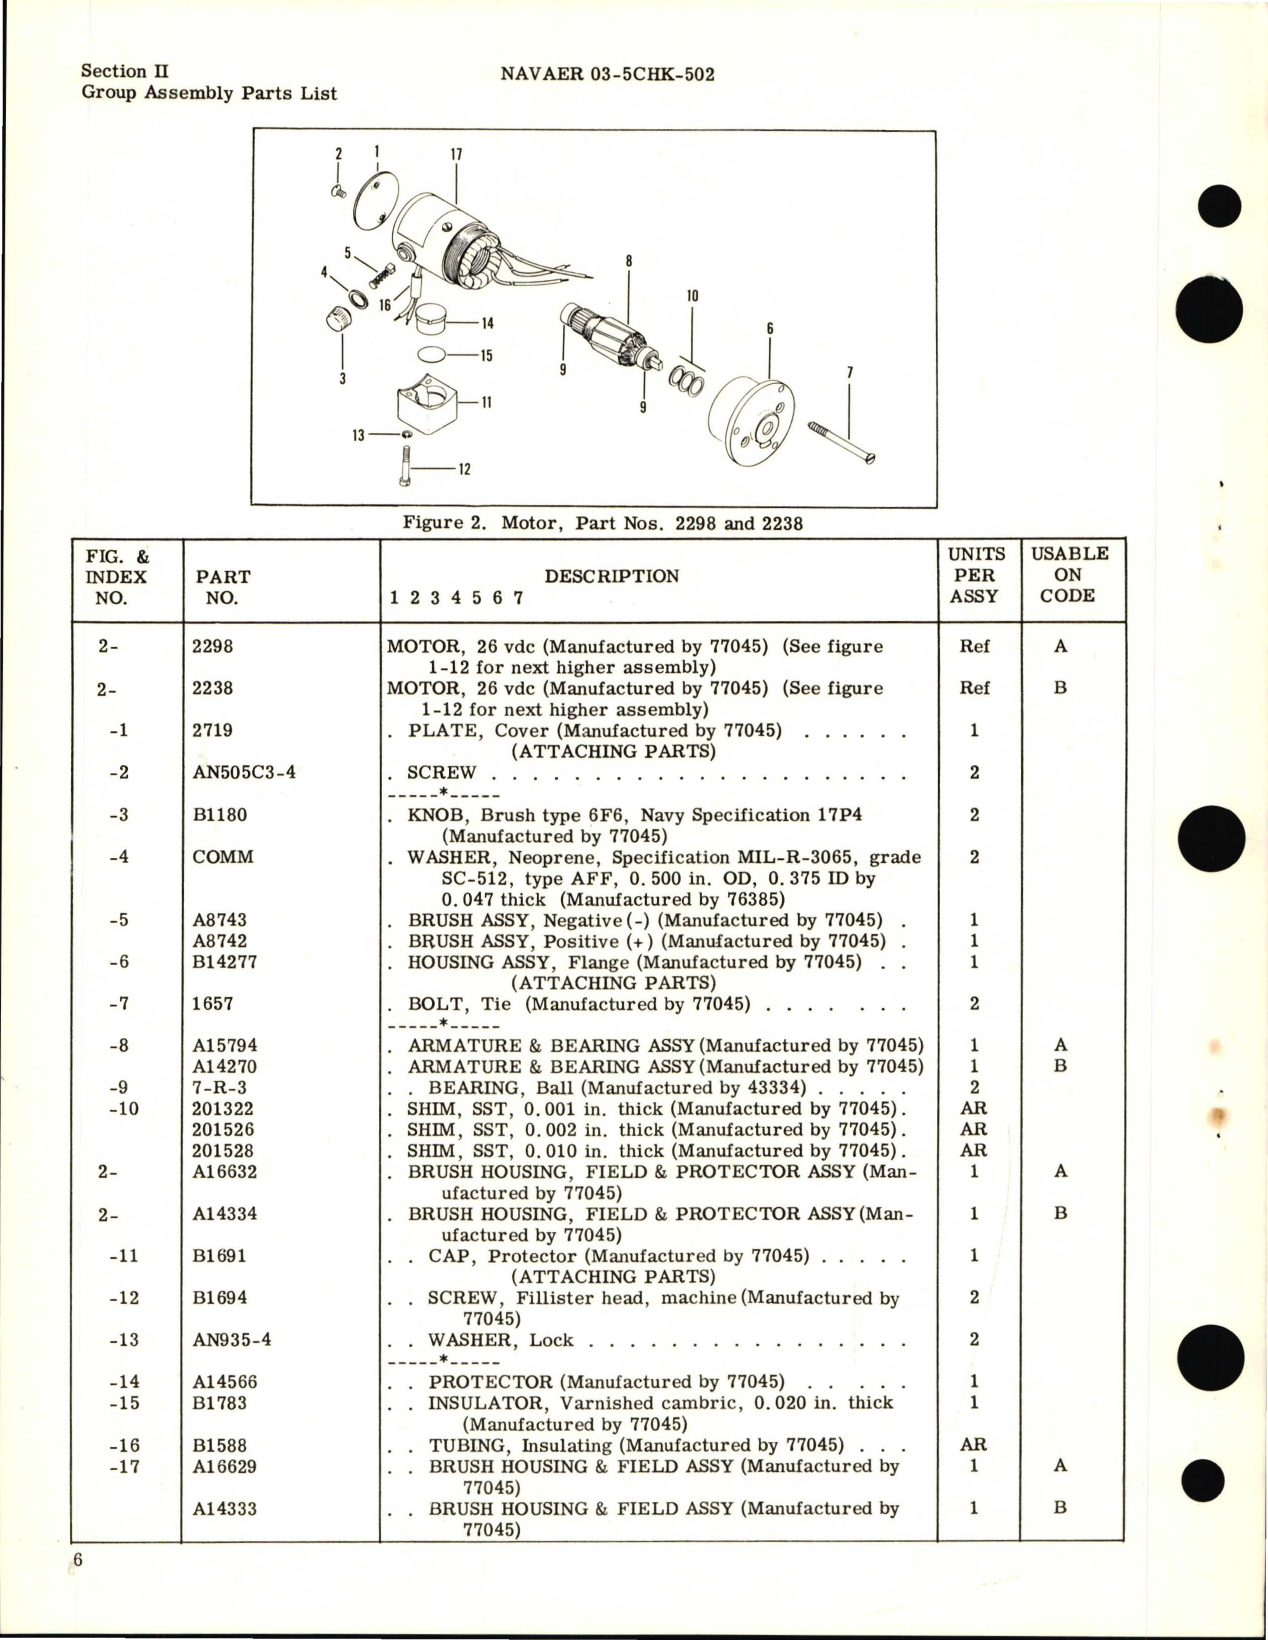 Sample page 8 from AirCorps Library document: Illustrated Parts Breakdown for Actuator Assembly, Aileron Artificial Feel Trim Part Numbers AL-1910 and AL-1423-1